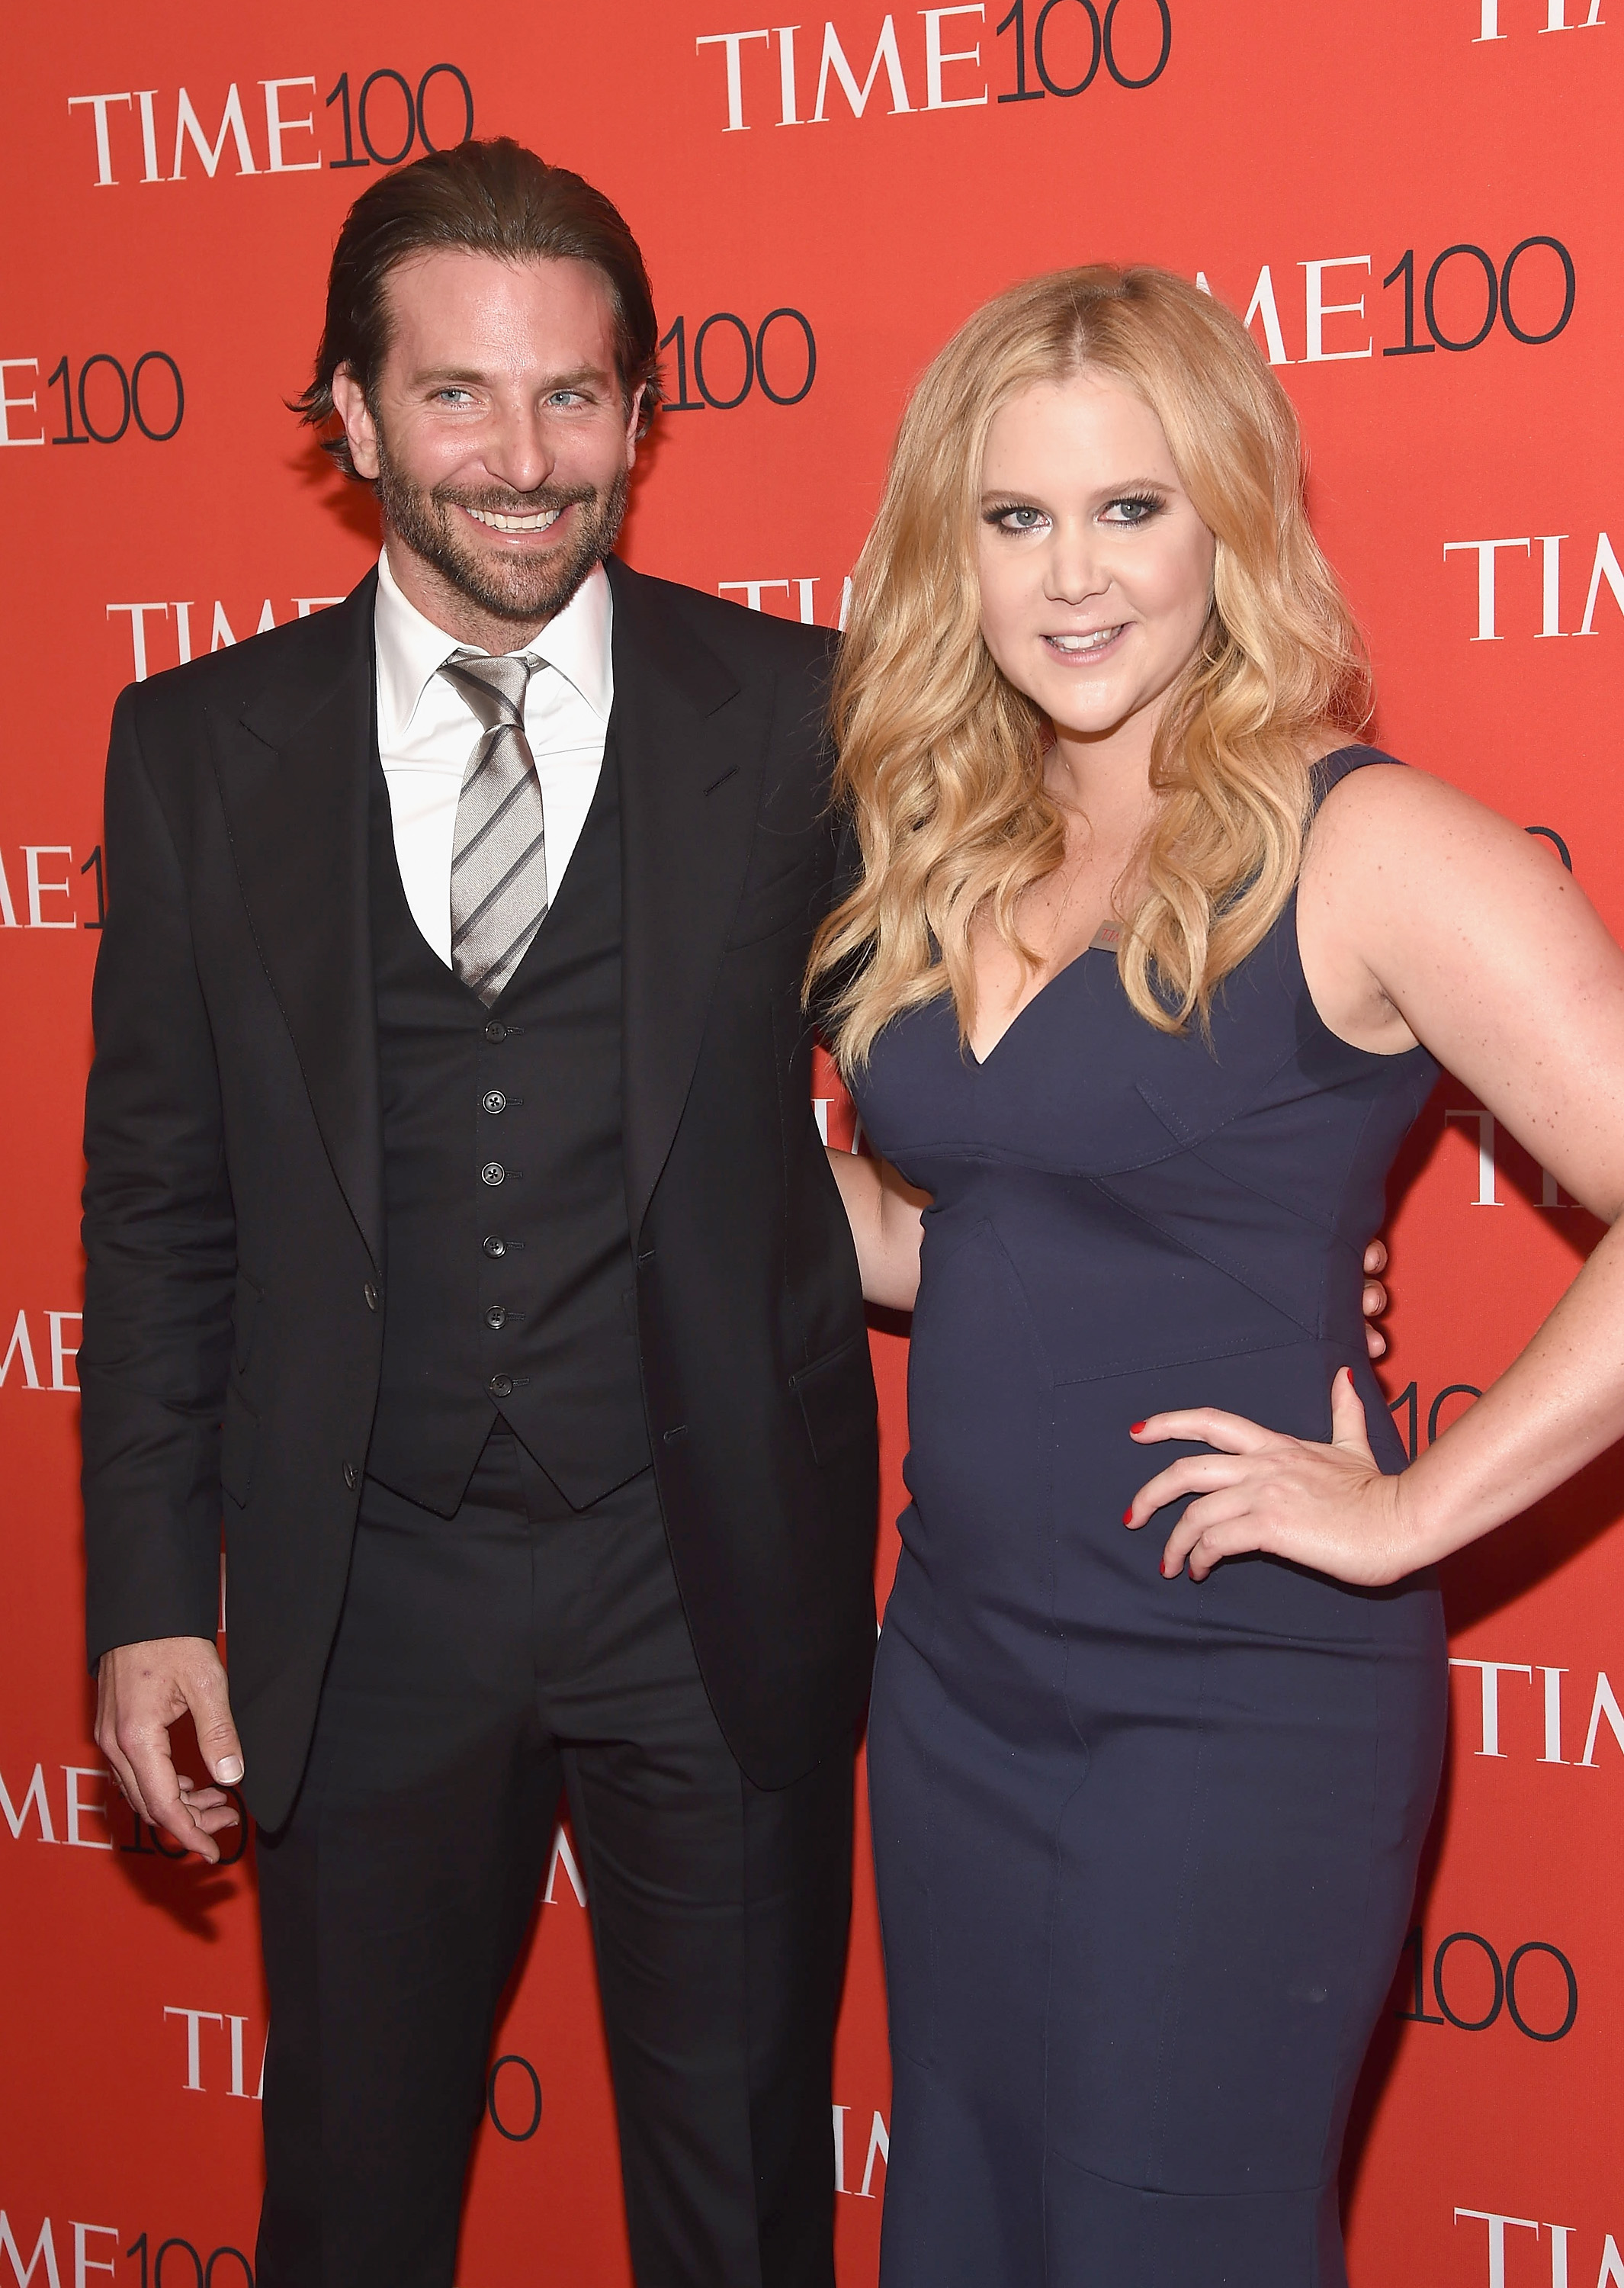 Bradley Cooper and Amy Schumer at TIME 100 Gala in New York City on April 21, 2015.